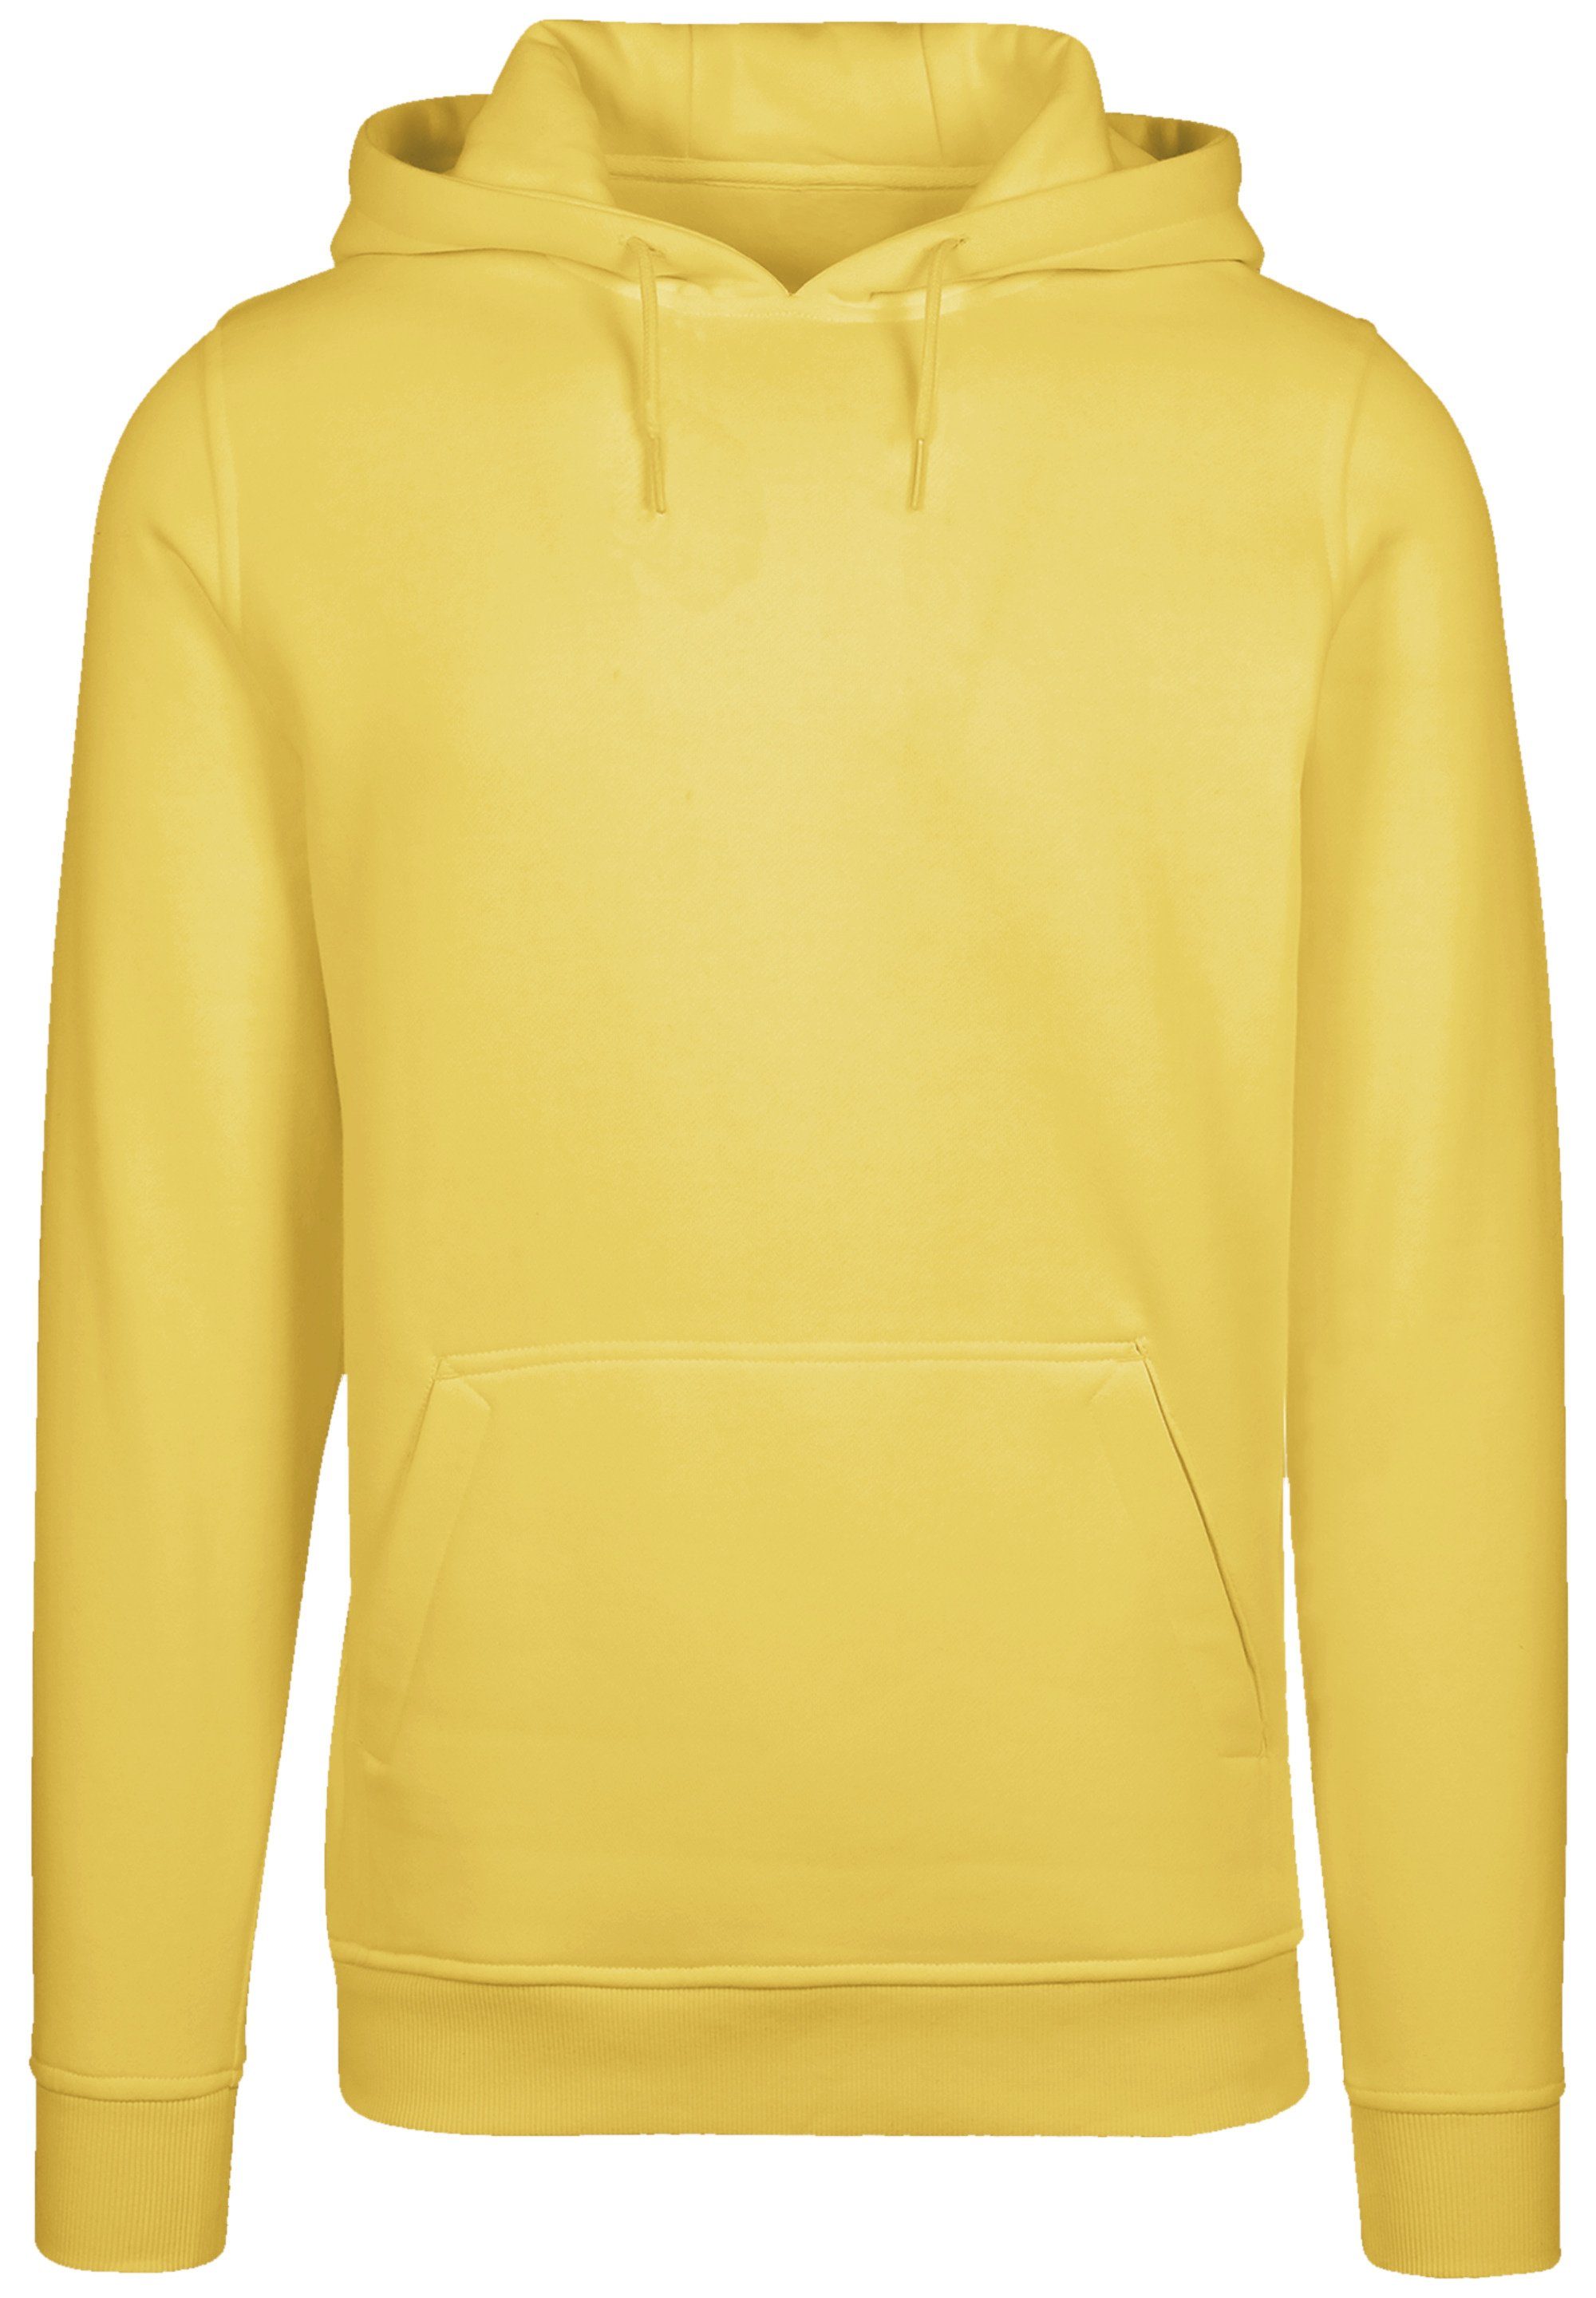 Musik Kapuzenpullover Band Hoodie, taxi Warm, Bequem Beatles Rock yellow The F4NT4STIC Abbey Road